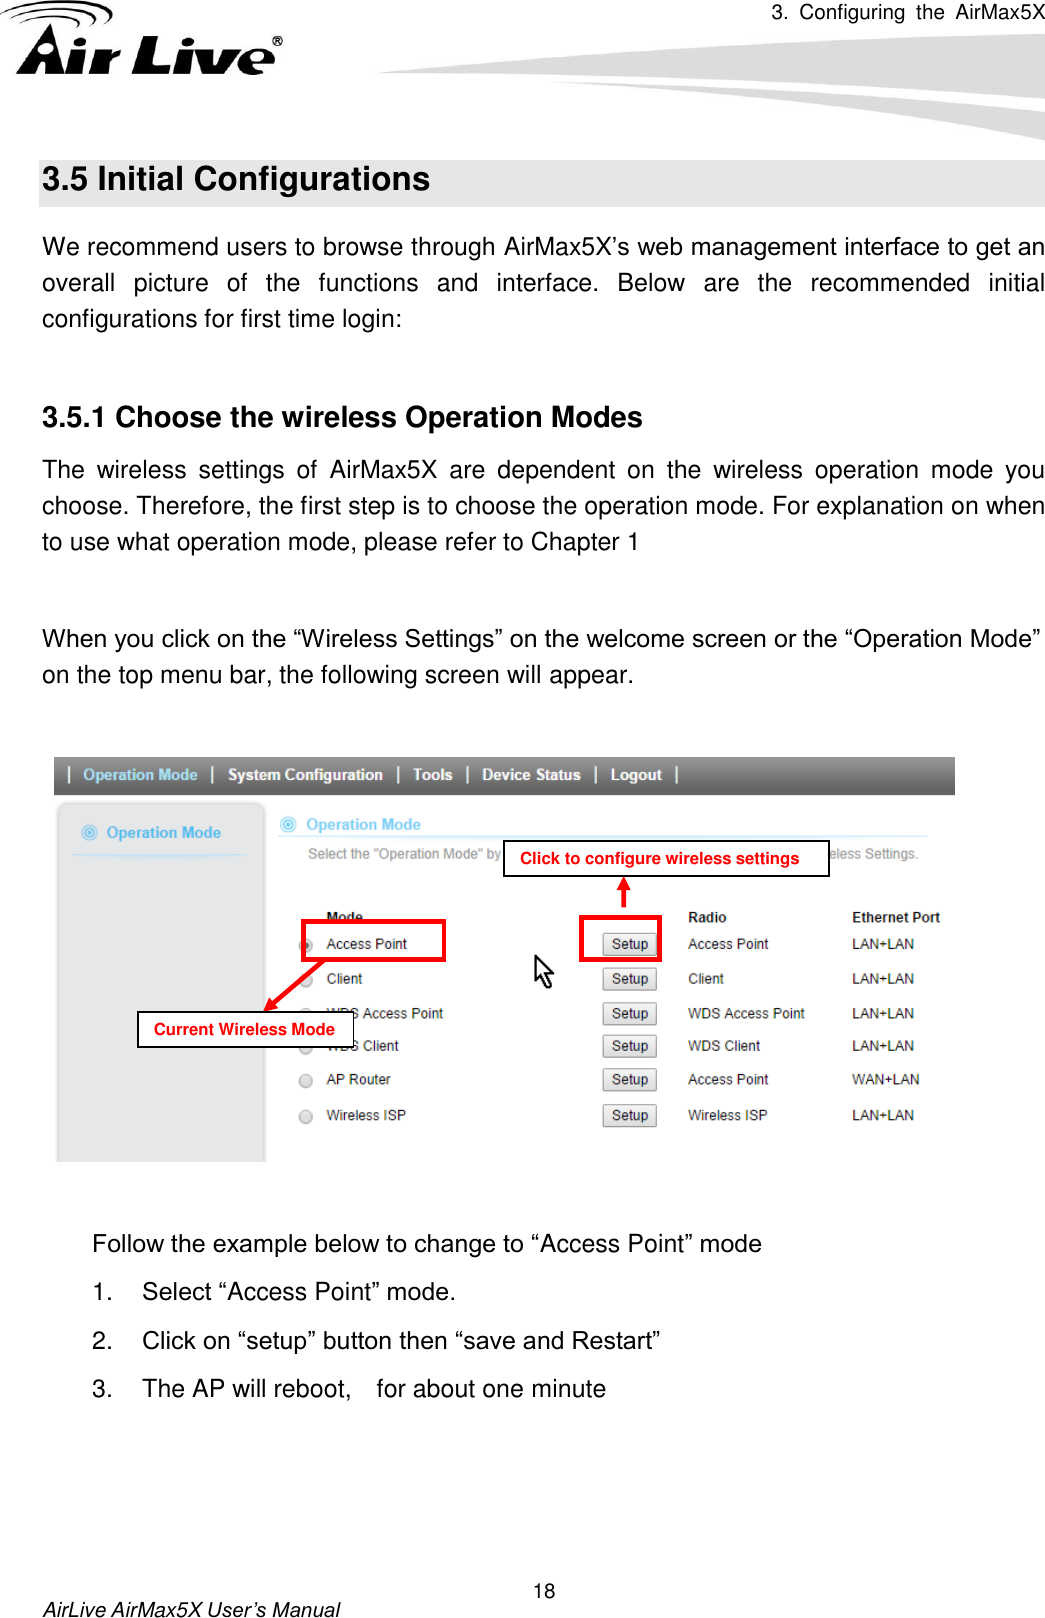 3.  Configuring  the  AirMax5X   AirLive AirMax5X User’s Manual 18 3.5 Initial Configurations We recommend users to browse through AirMax5X’s web management interface to get an overall  picture  of  the  functions  and  interface.  Below  are  the  recommended  initial configurations for first time login:  3.5.1 Choose the wireless Operation Modes   The  wireless  settings  of  AirMax5X  are  dependent  on  the  wireless  operation  mode  you choose. Therefore, the first step is to choose the operation mode. For explanation on when to use what operation mode, please refer to Chapter 1  When you click on the “Wireless Settings” on the welcome screen or the “Operation Mode” on the top menu bar, the following screen will appear.      Follow the example below to change to “Access Point” mode 1. Select “Access Point” mode. 2. Click on “setup” button then “save and Restart” 3.  The AP will reboot,    for about one minute Current Wireless Mode Click to configure wireless settings 